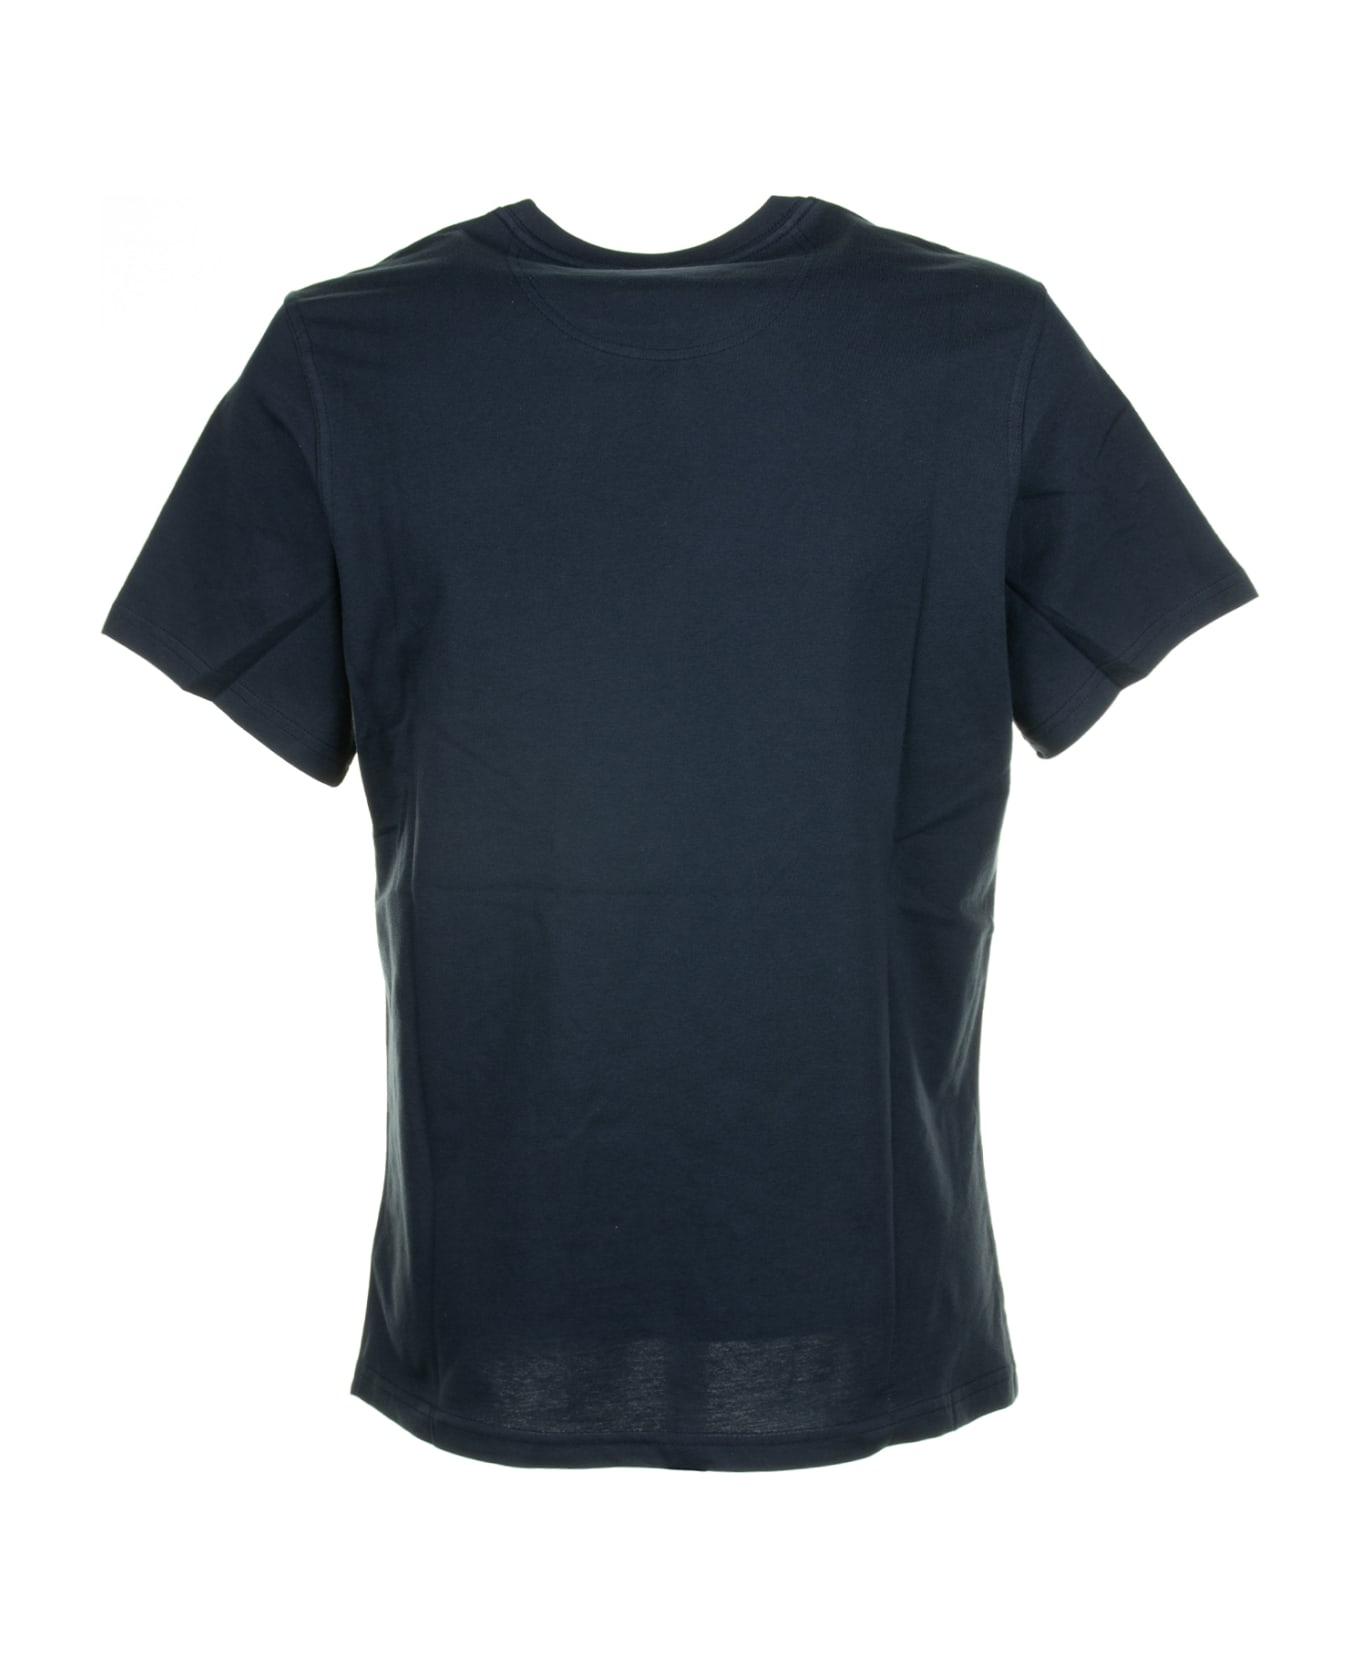 Barbour Navy Blue T-shirt With Pocket And Logo - NAVY